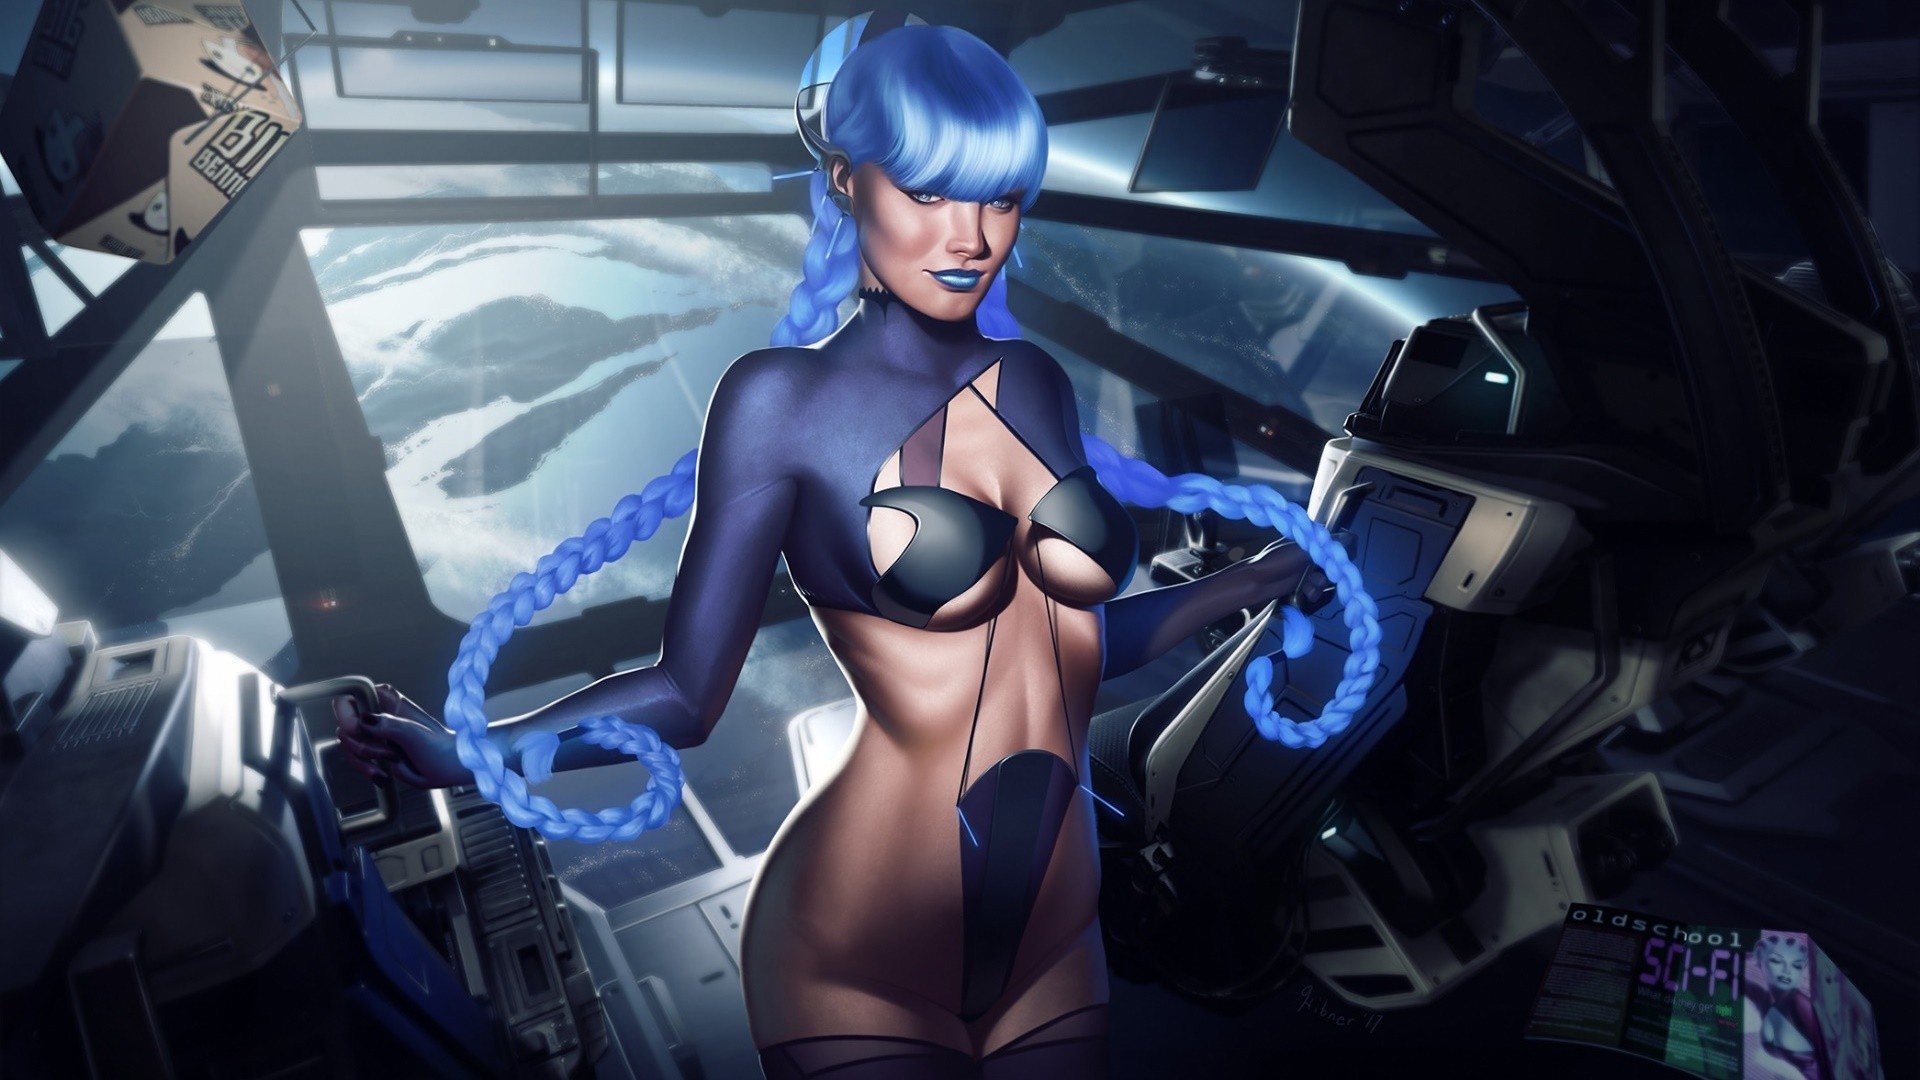 General 1920x1080 spaceship science fiction boobs women artwork blue hair Star Citizen video game characters